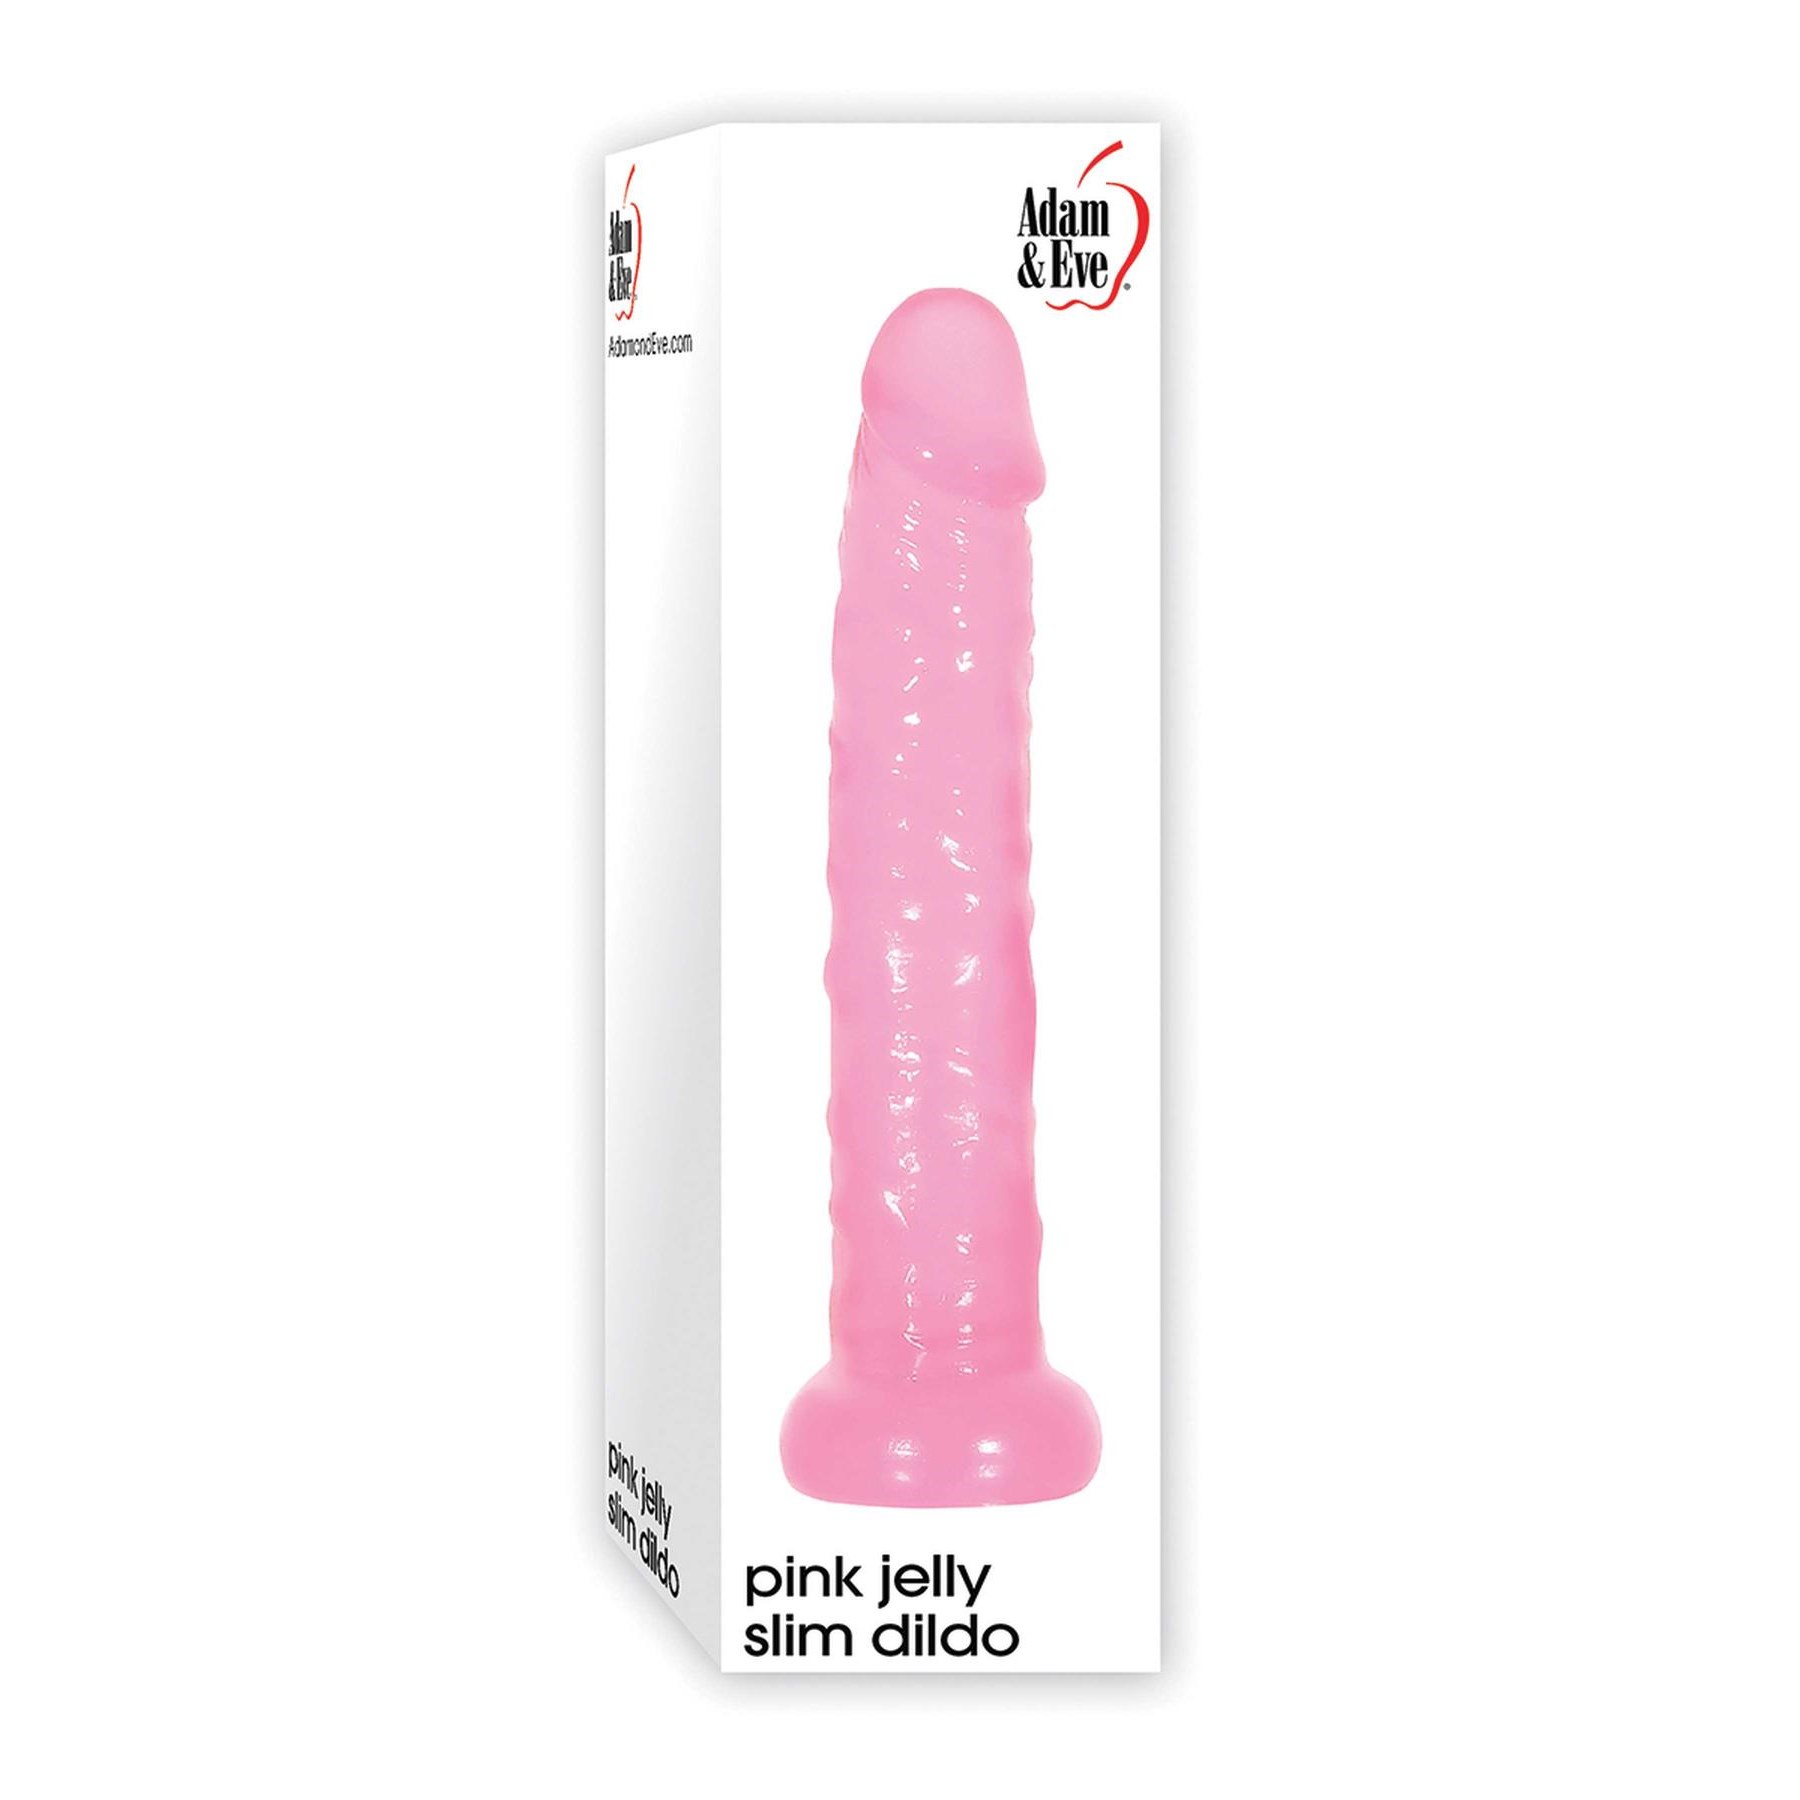 ADAM AND EVE PINK JELLY SLIM DILDO packaging